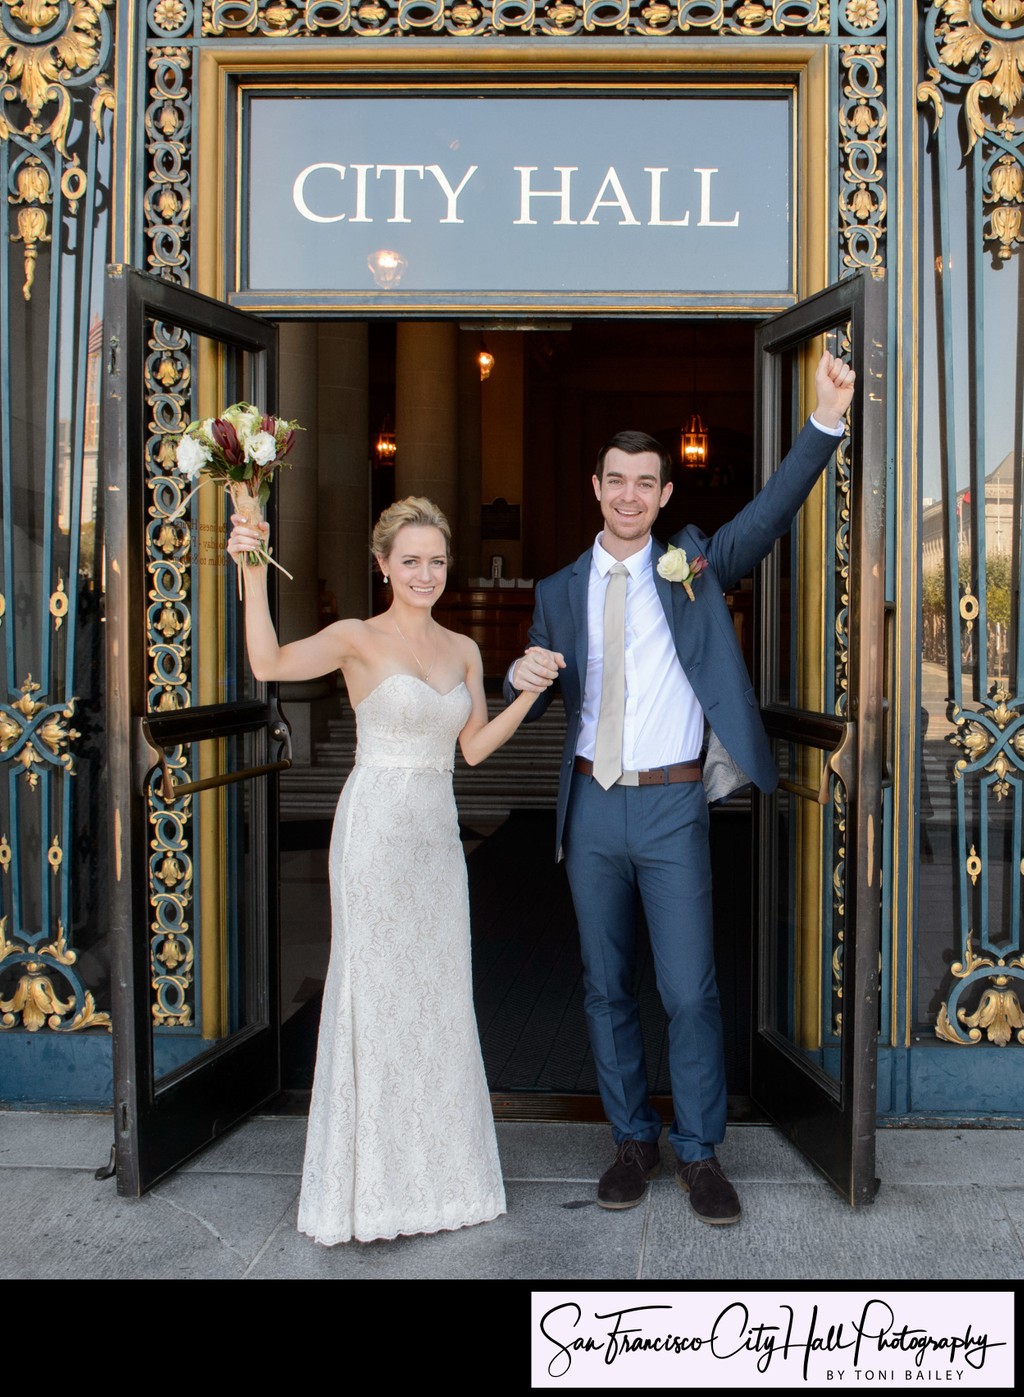 Newlyweds cheer as they depart San Francisco City Hall